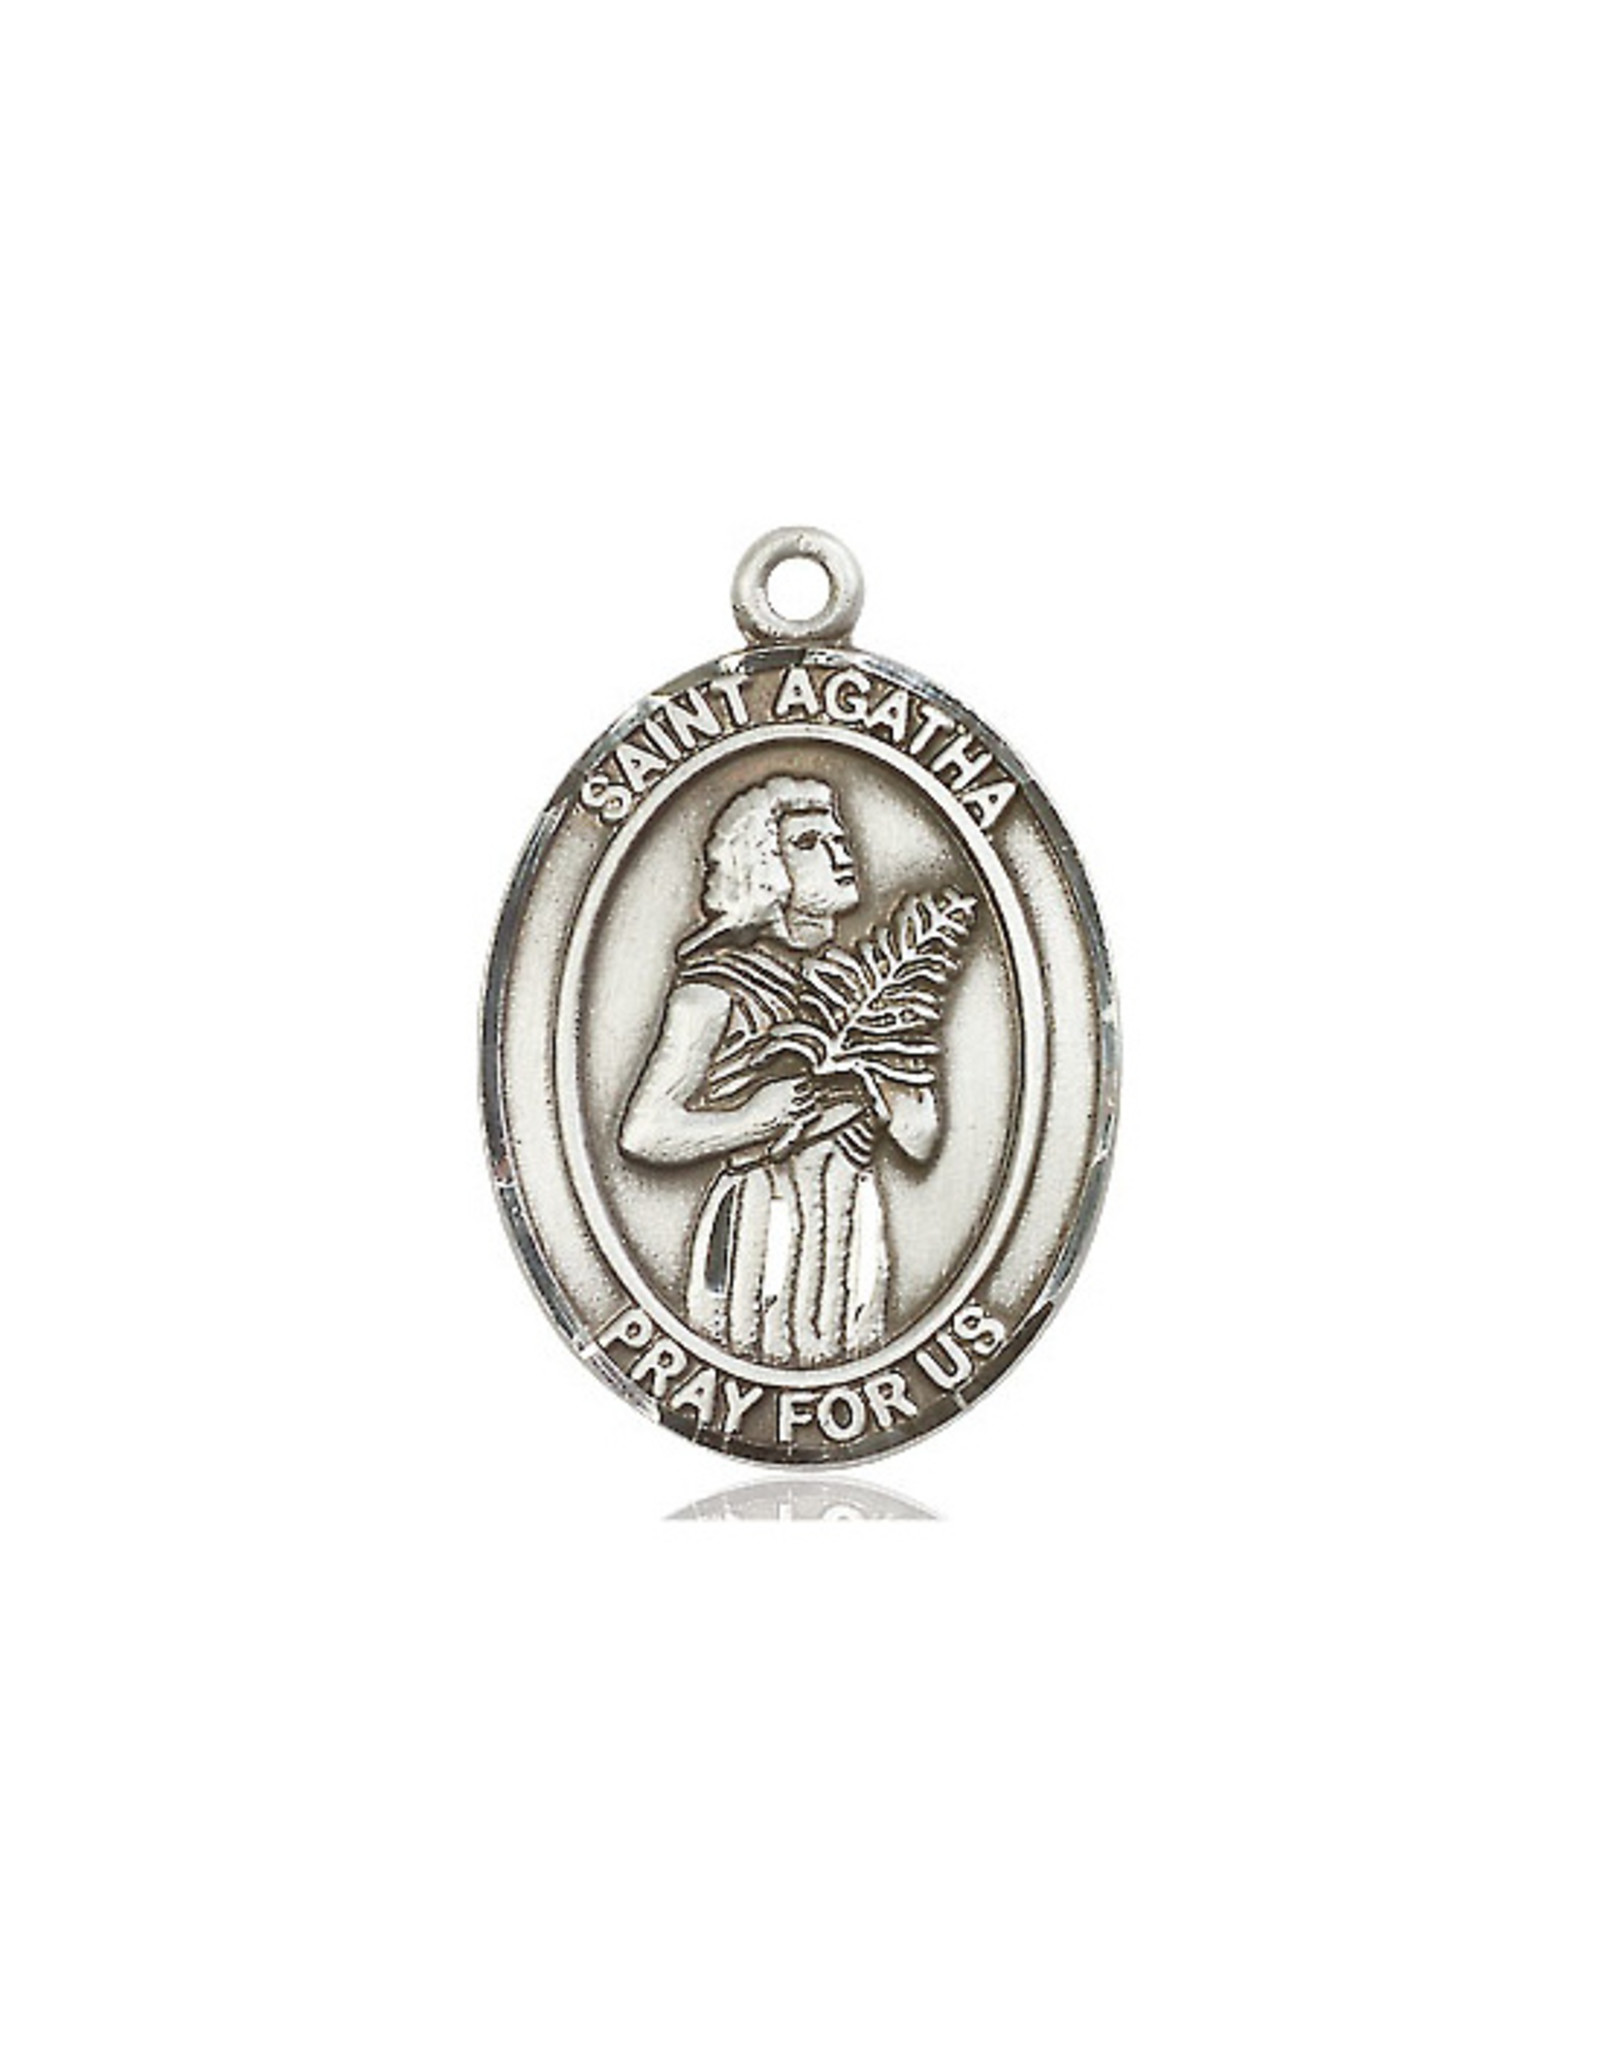 Bliss St. Agatha Medal, Sterling Silver 8003SS